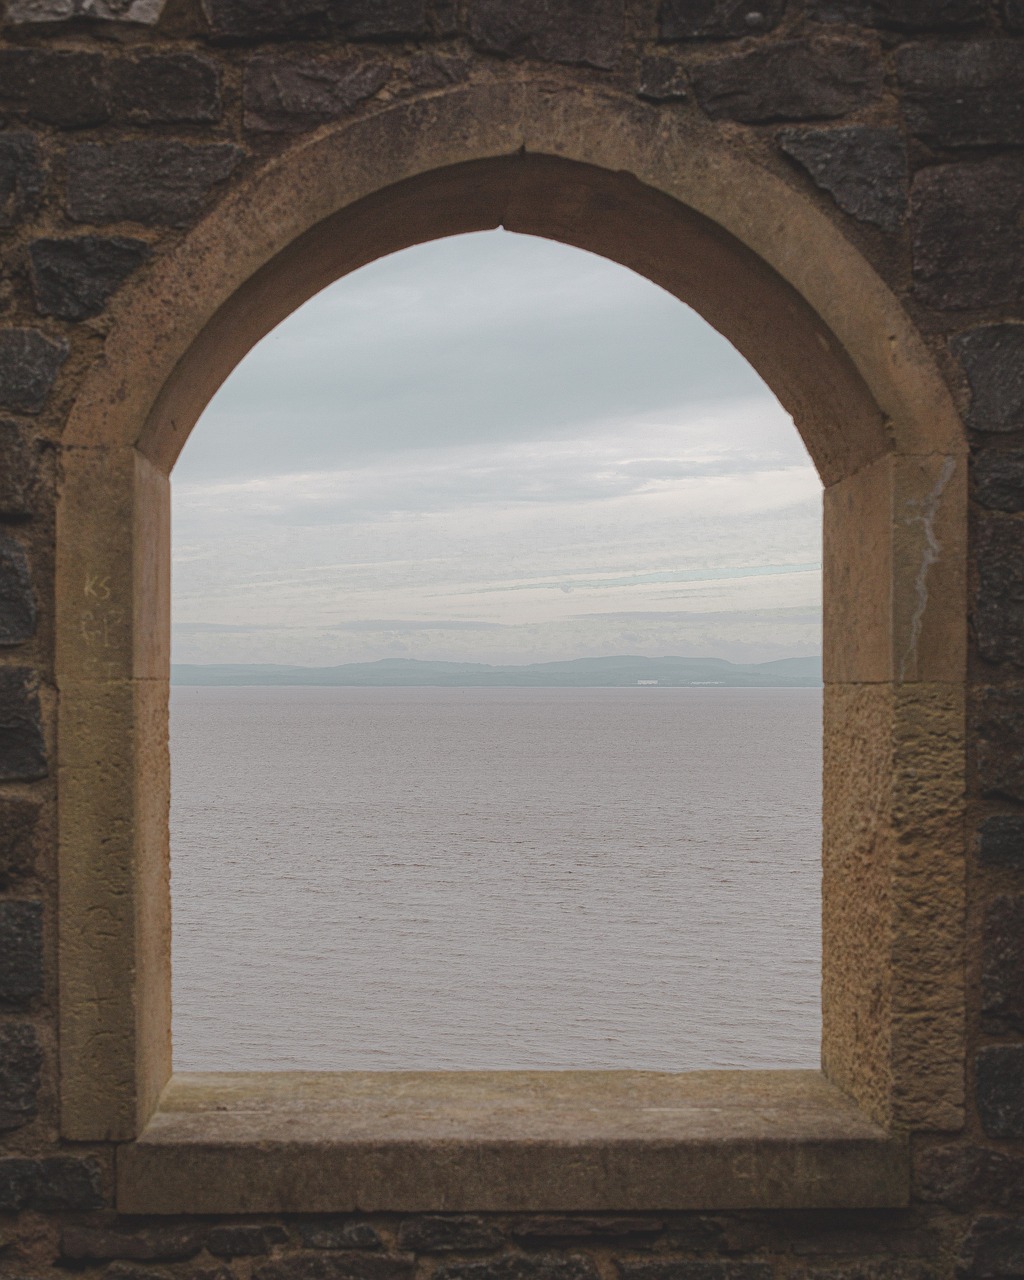 Clevedon and Surrounds: History, Art, and Culinary Delights